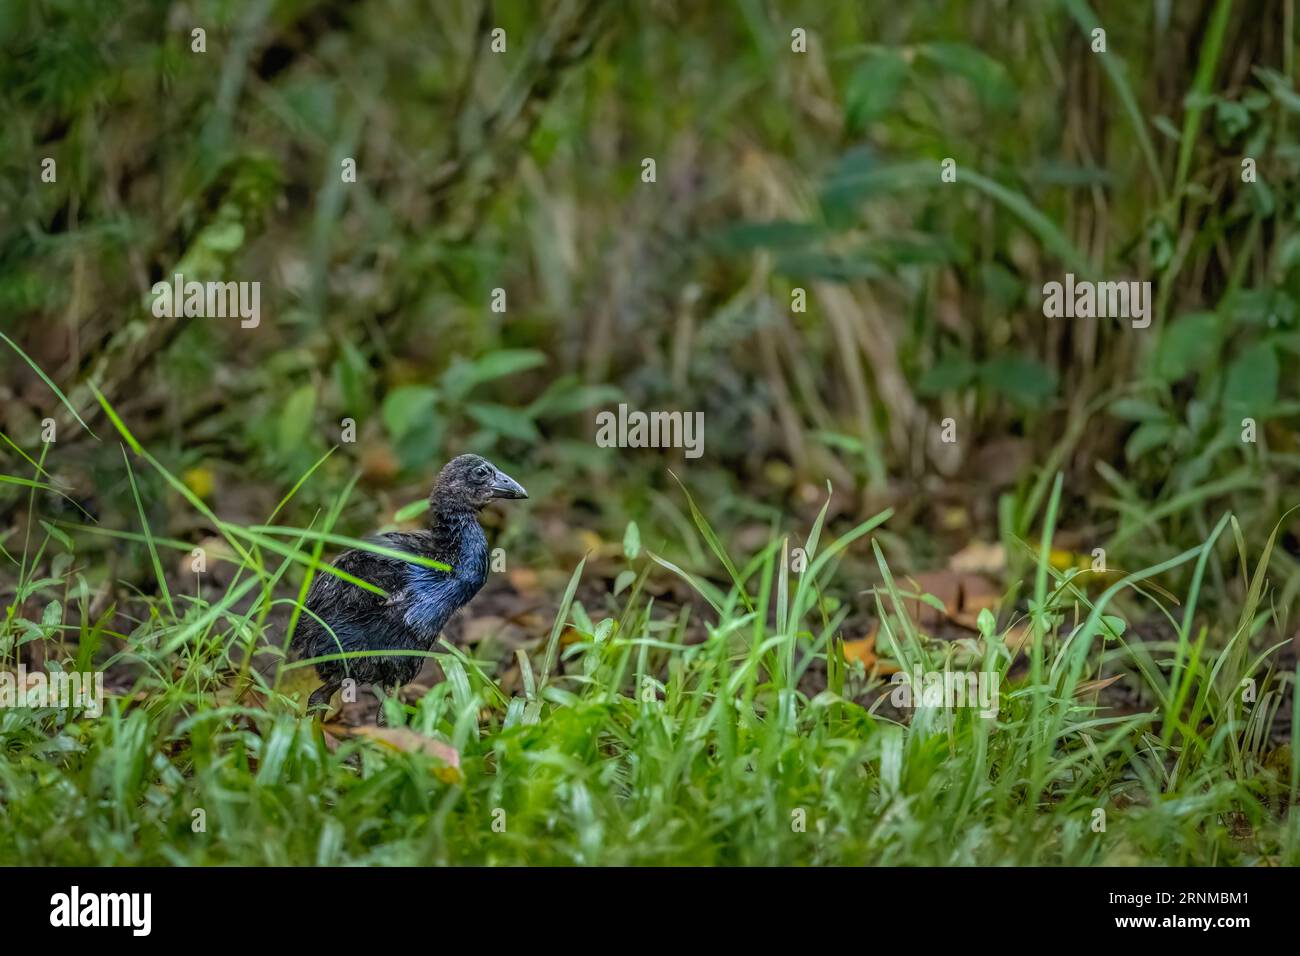 A young Pukeko(Purple Swamphen) walking through the short grass after wandering away from its mother in Hastie's Swamp in Atherton, Austra;lia. Stock Photo